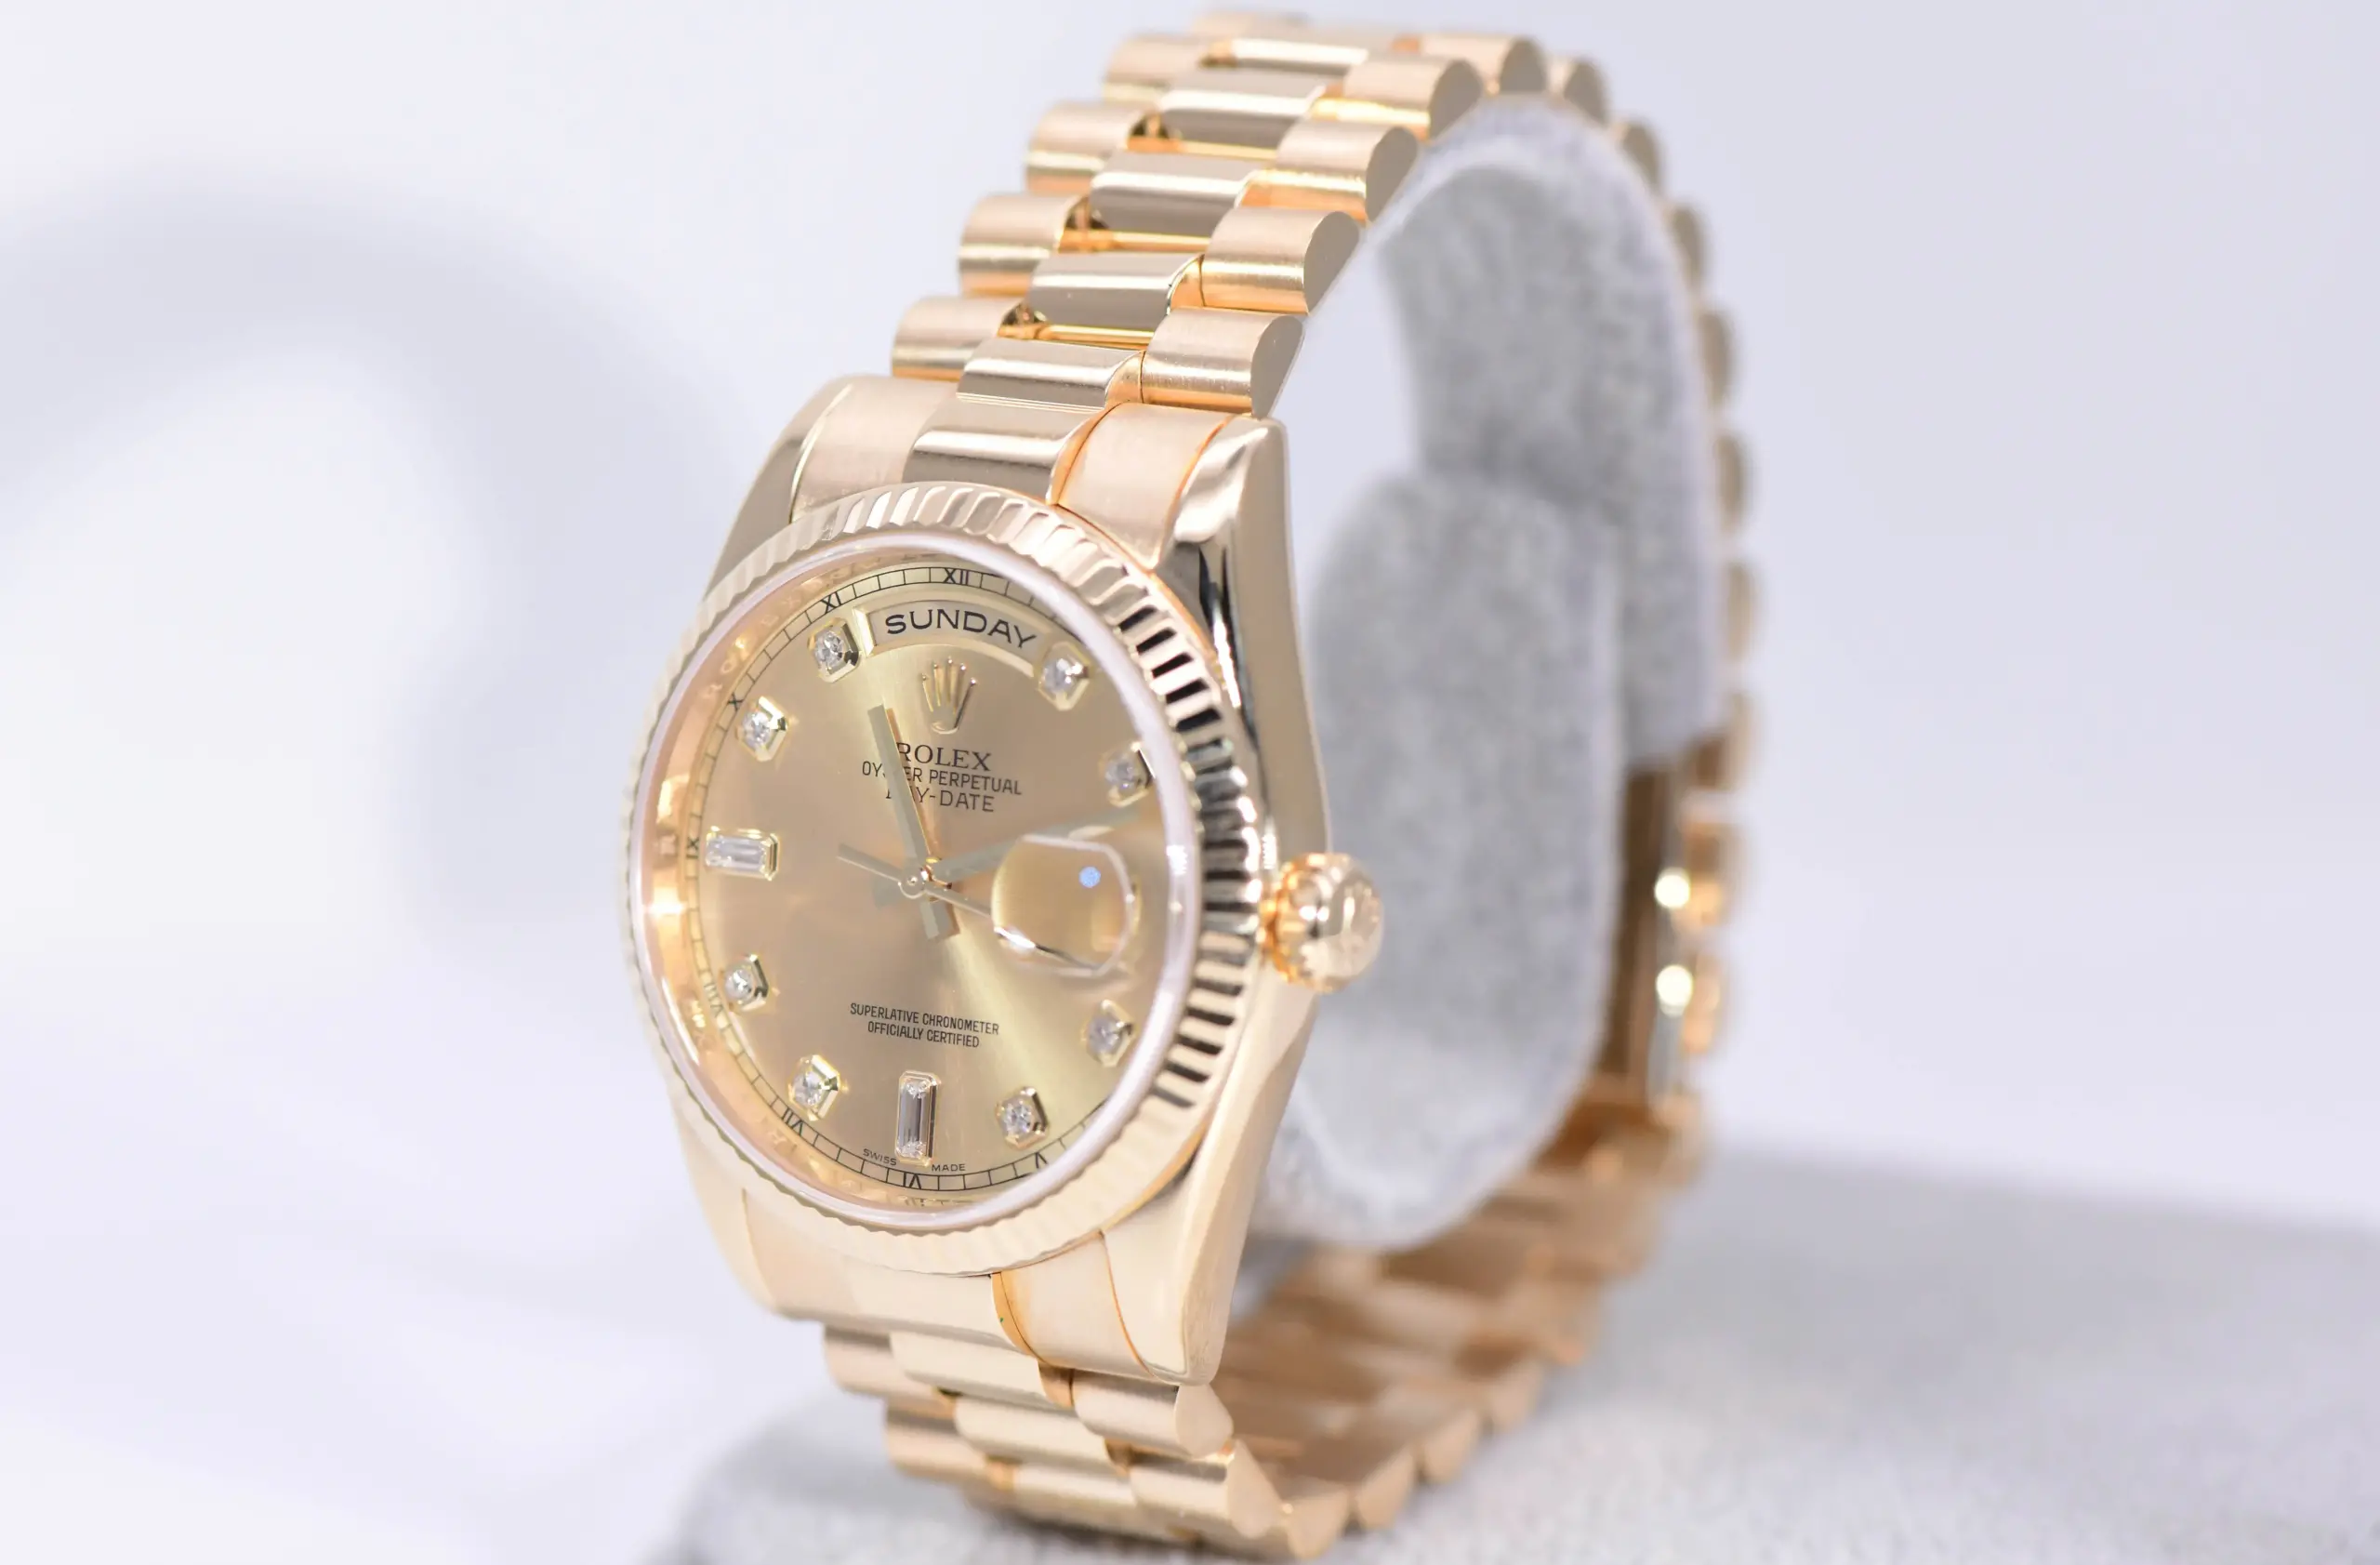 Rolex Oyster Perpetual Day-Date 36mm 118238 Diamond 18k Gold